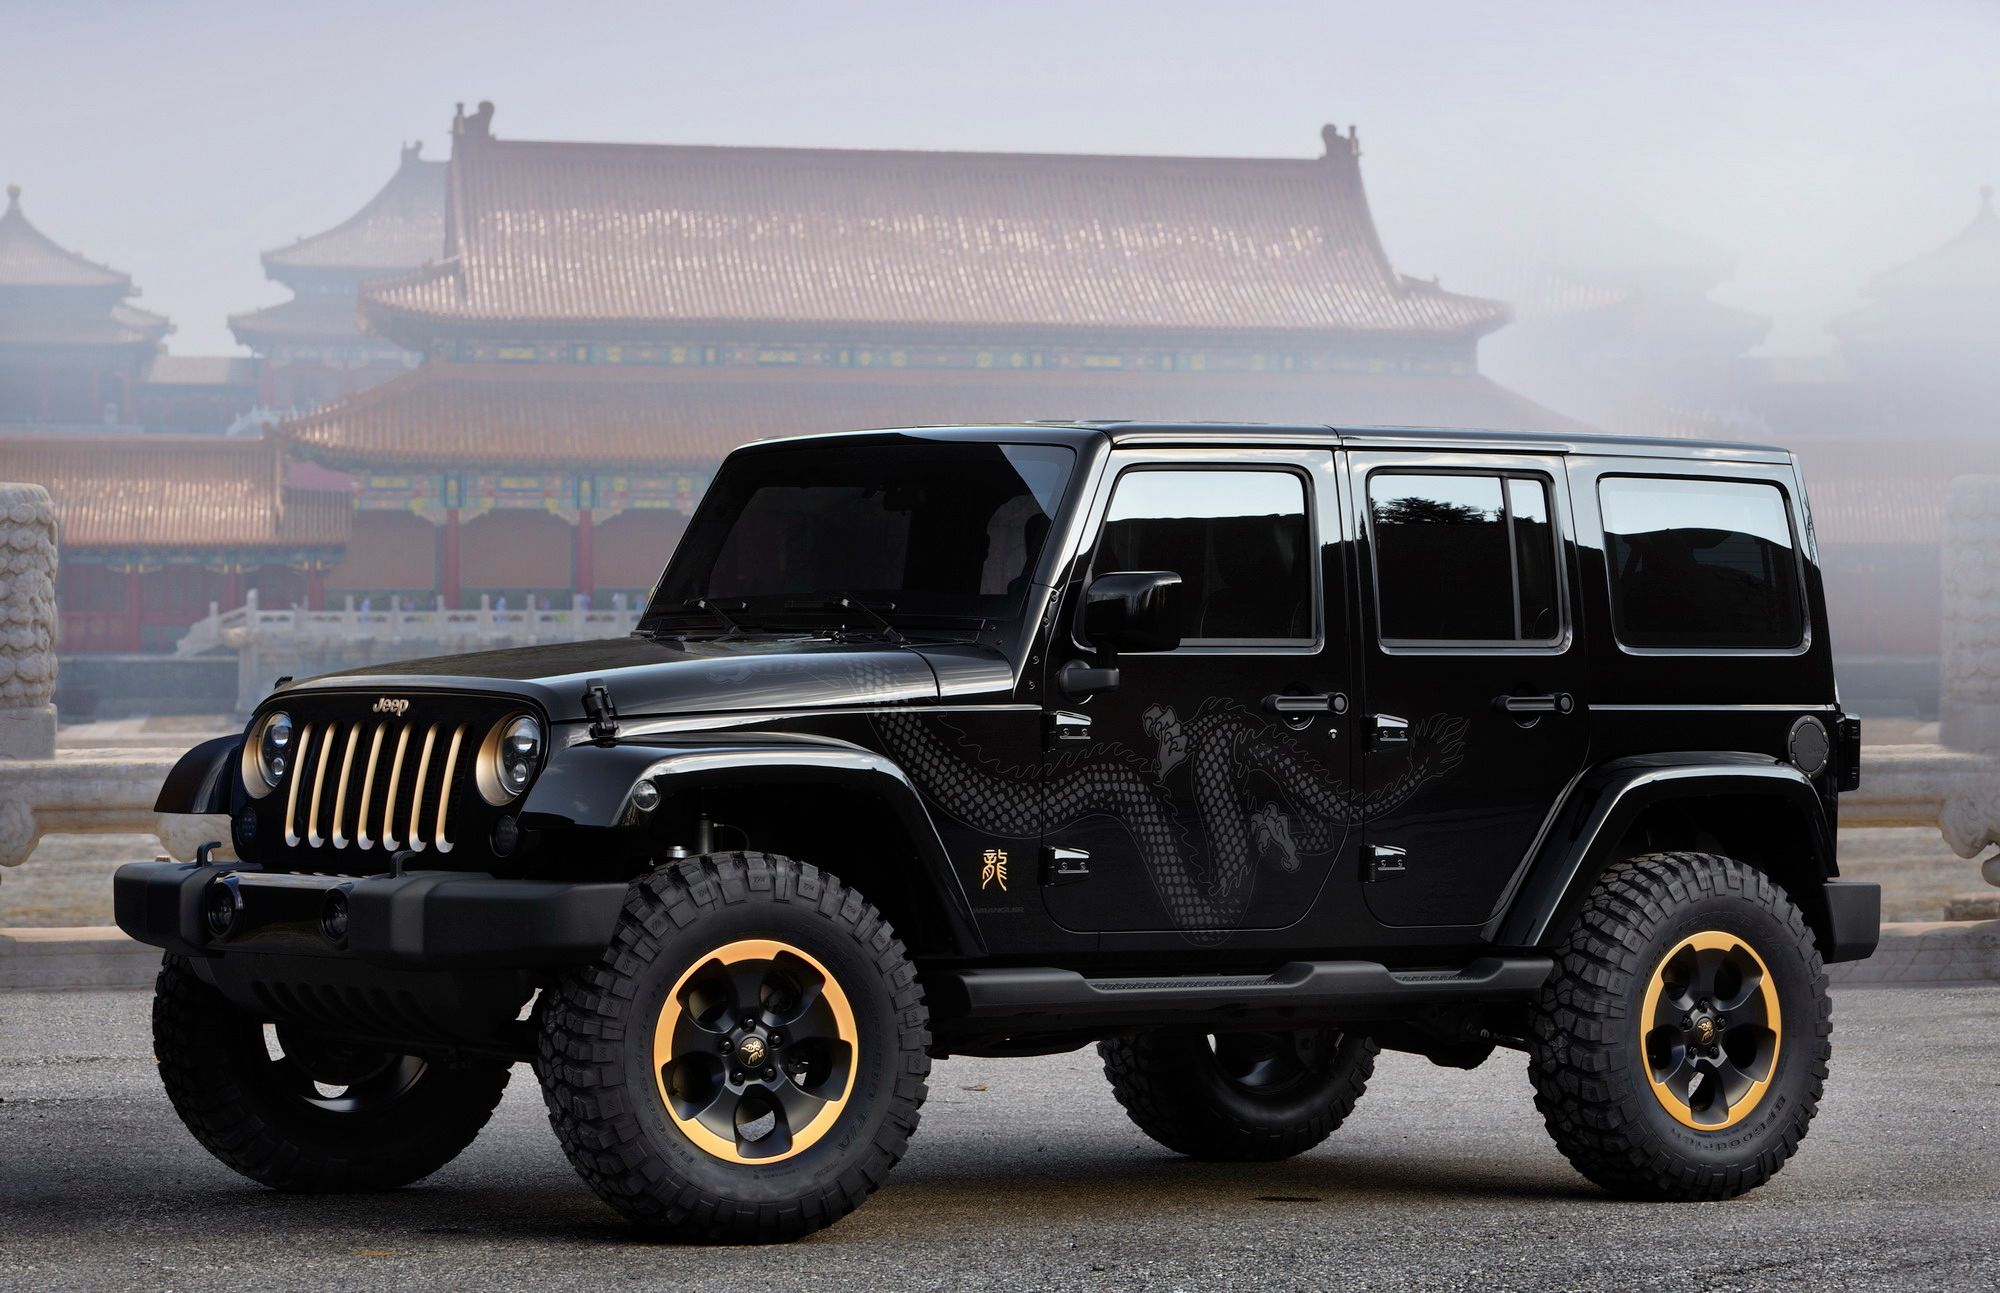 2012 Jeep Wrangler Year of the Dragon Concept